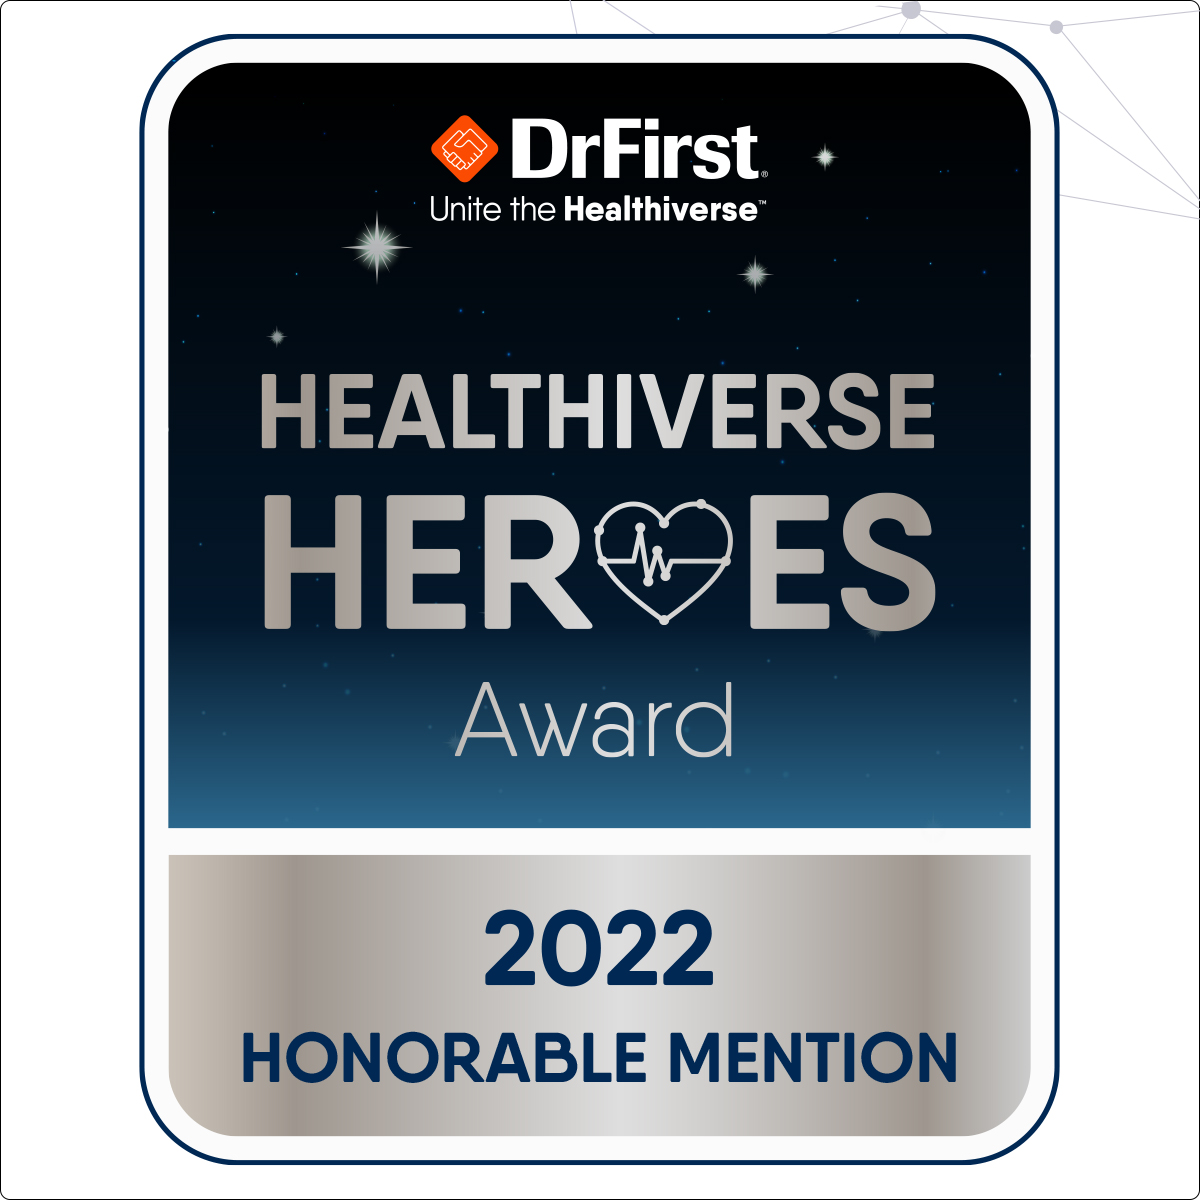 ou earned an Honorable Mention in the 2022 DrFirst Awards!